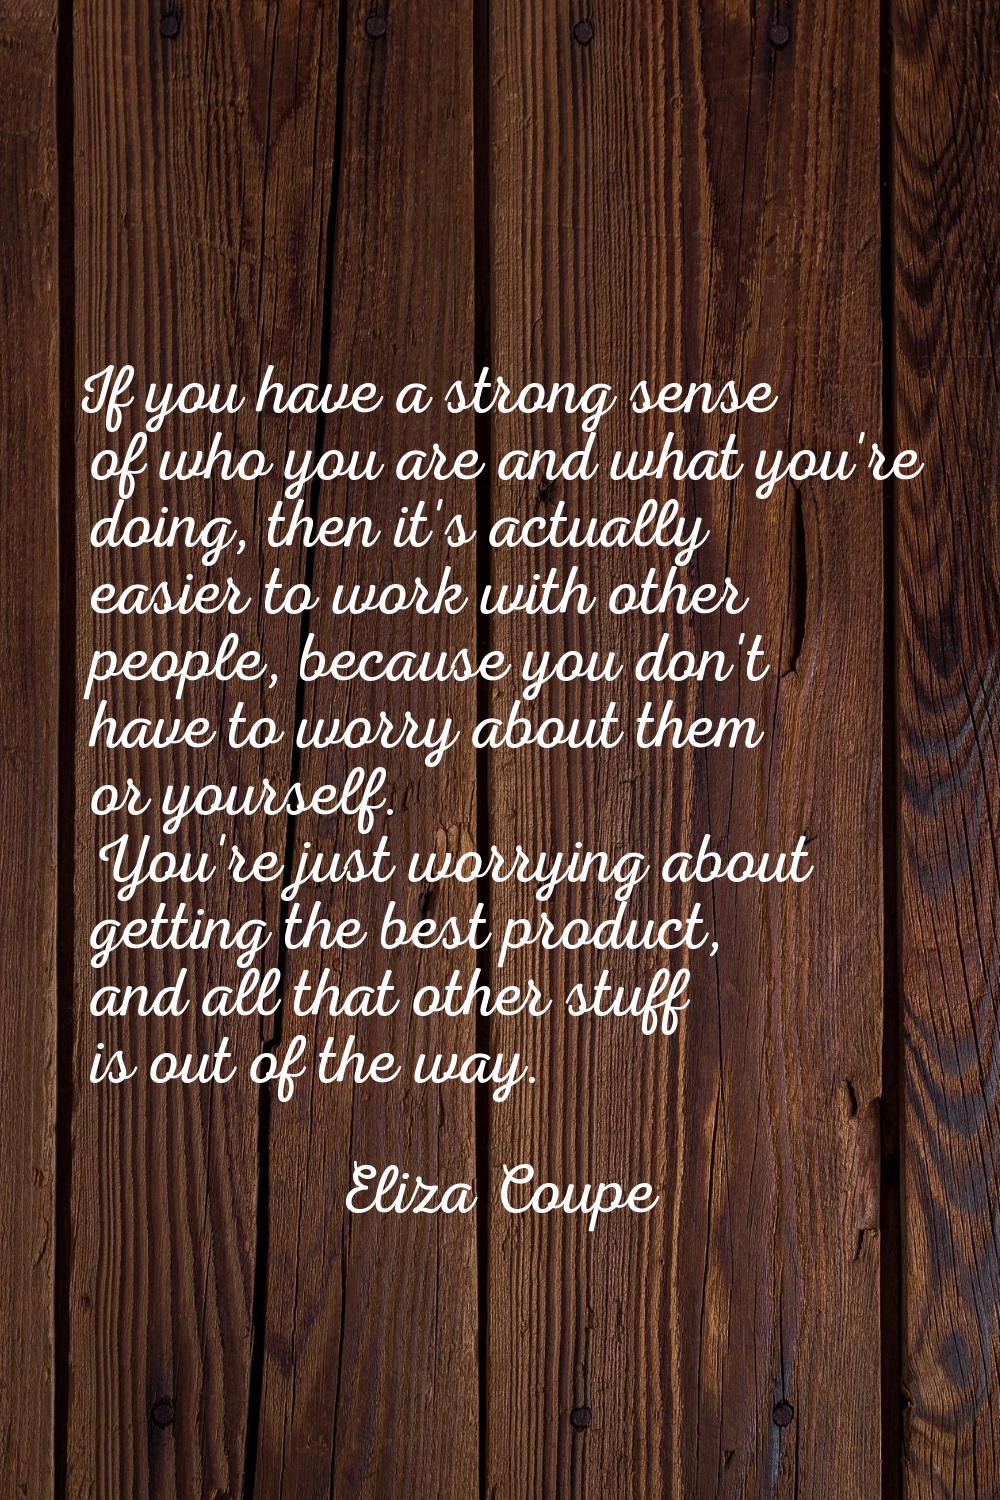 If you have a strong sense of who you are and what you're doing, then it's actually easier to work 